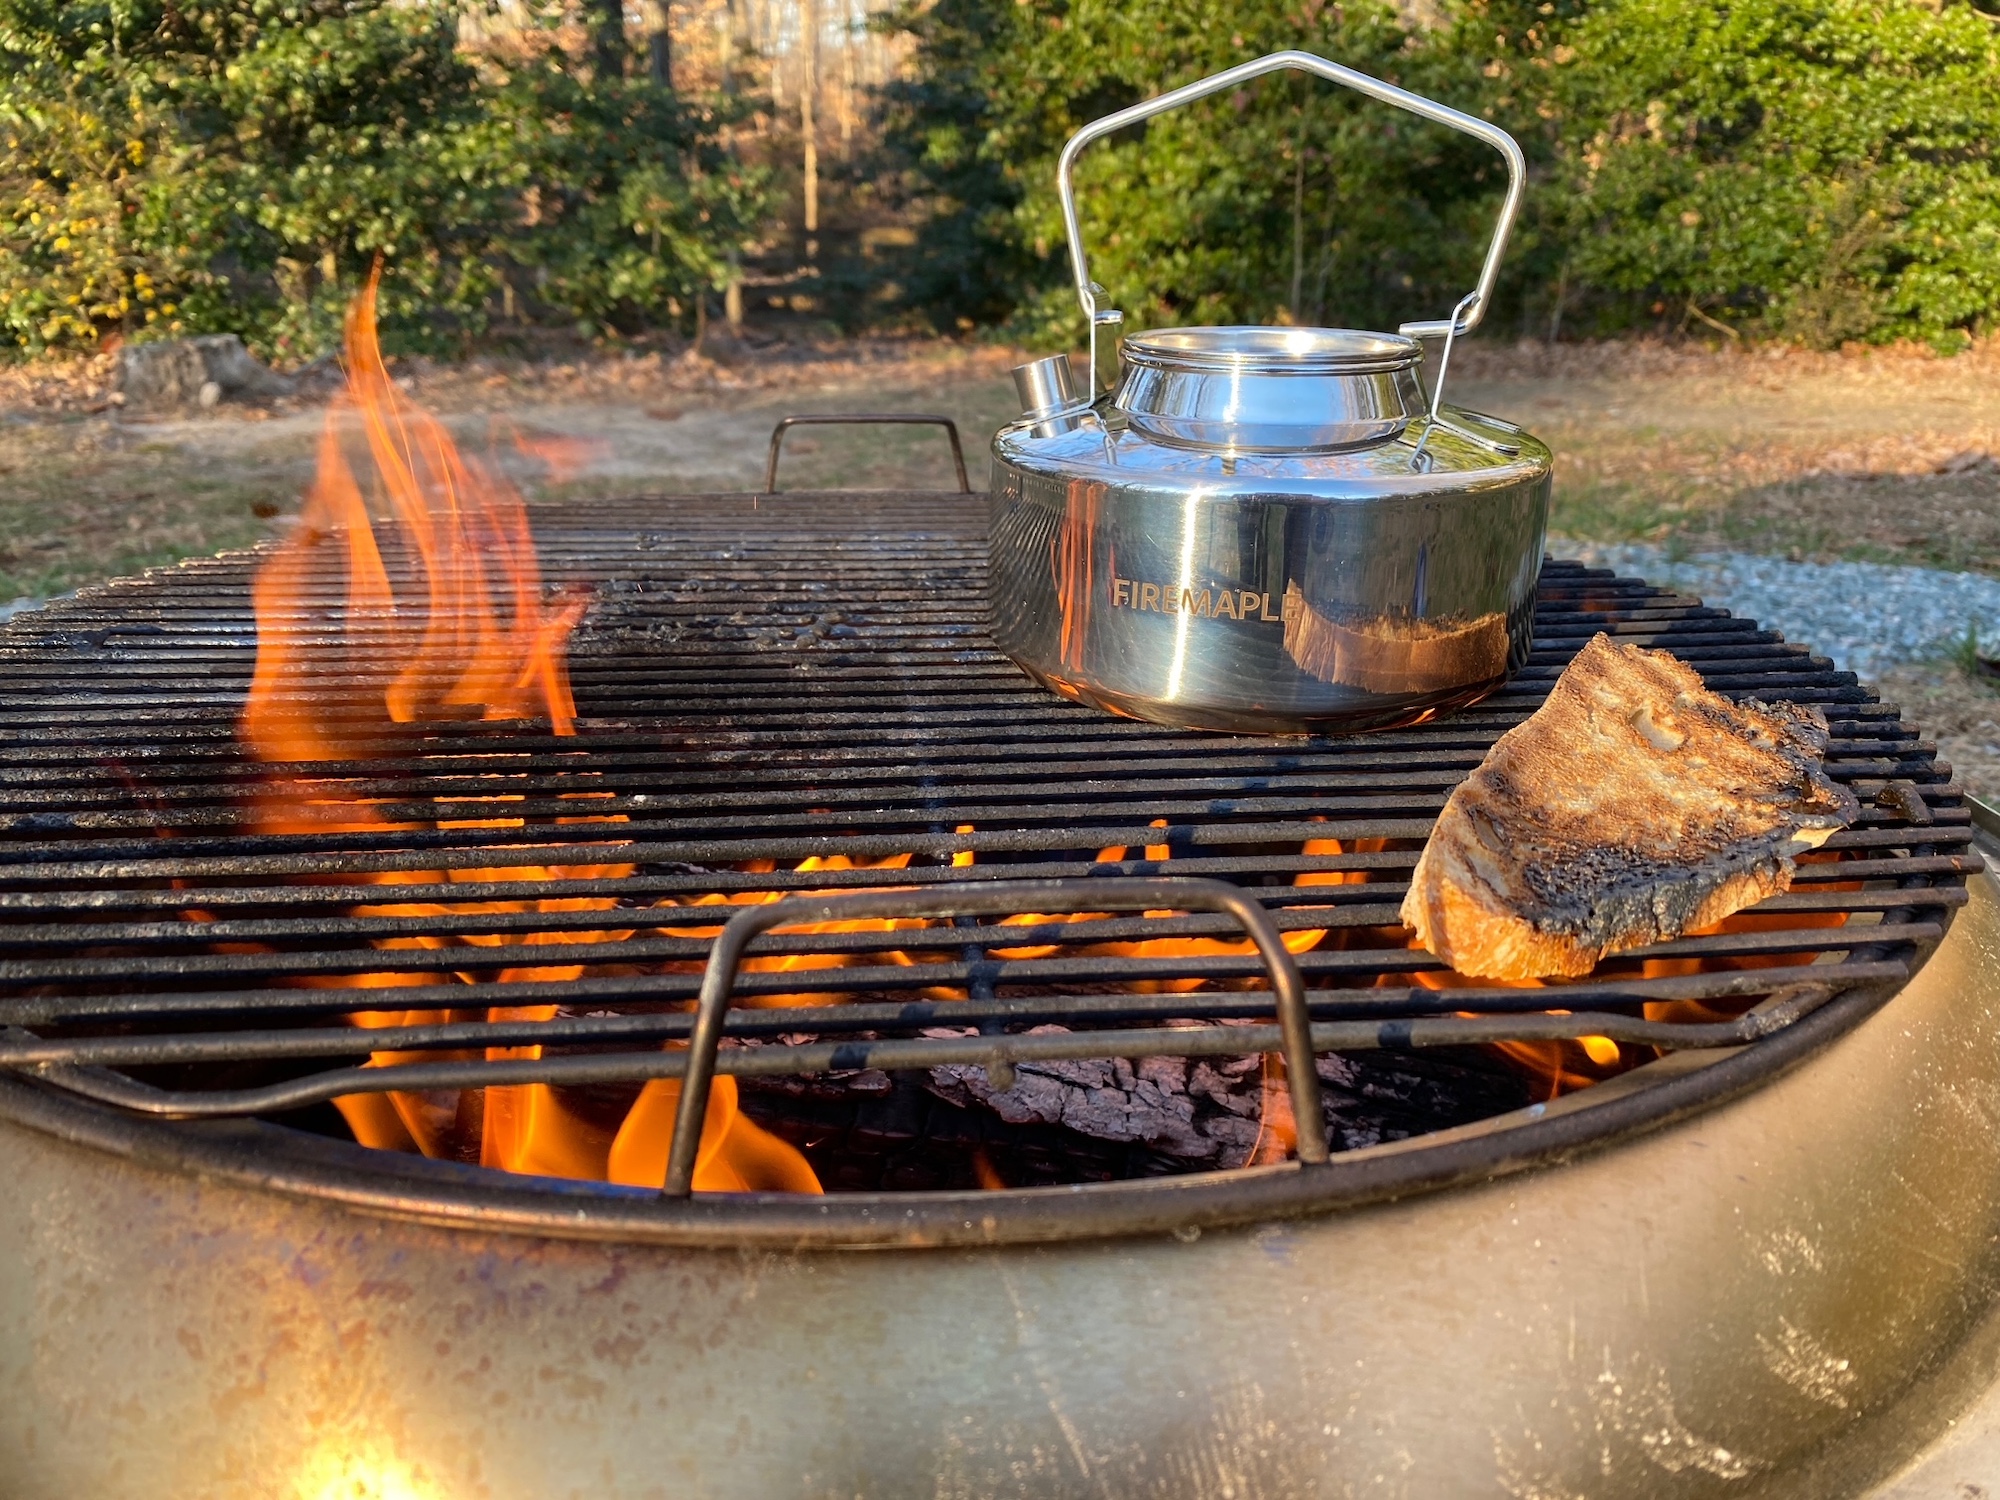 A kettle and piece of bread over a fire pit flame